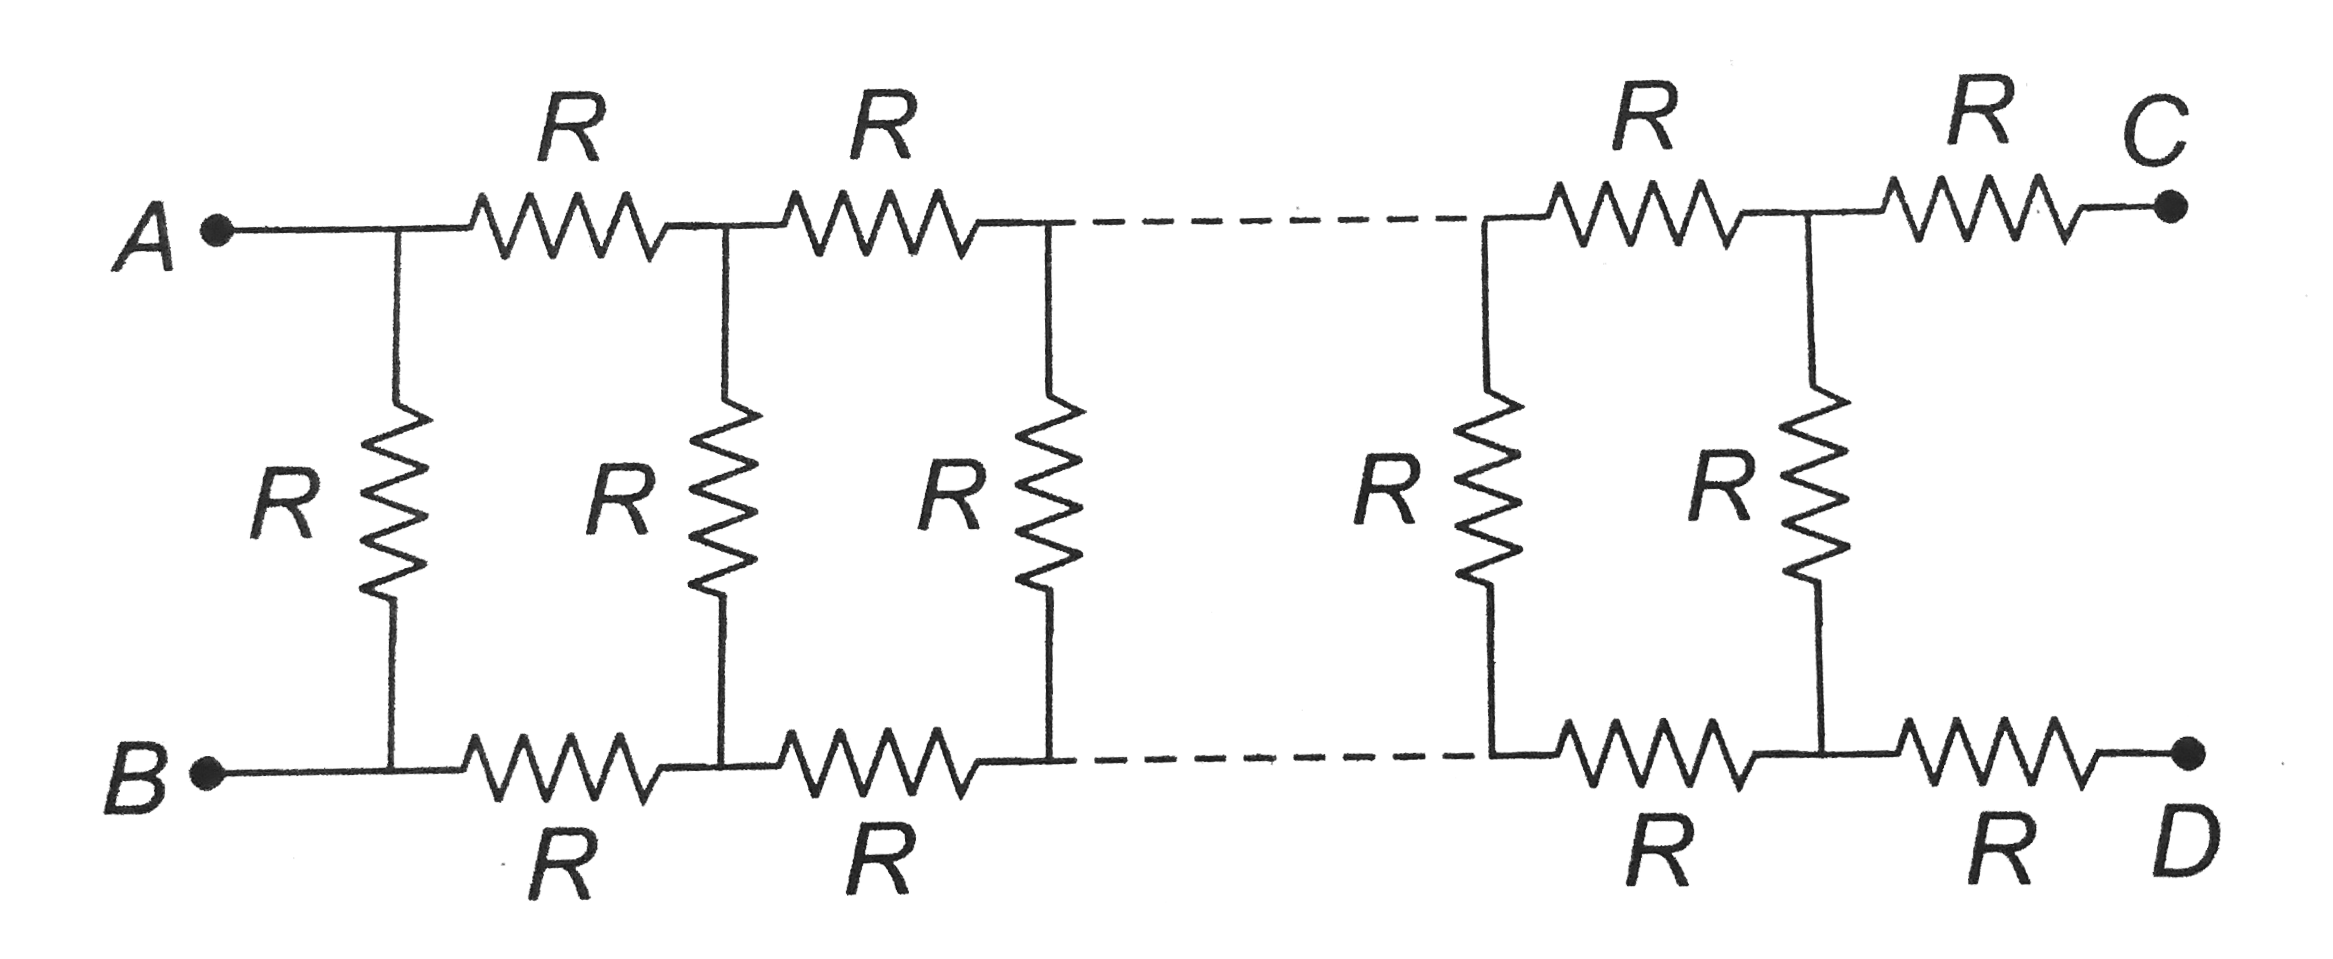 In the figure, the value of resistors to be connected between C and D so that the resistance of the entire circuit between A and B does not change with the number of elementary set used is